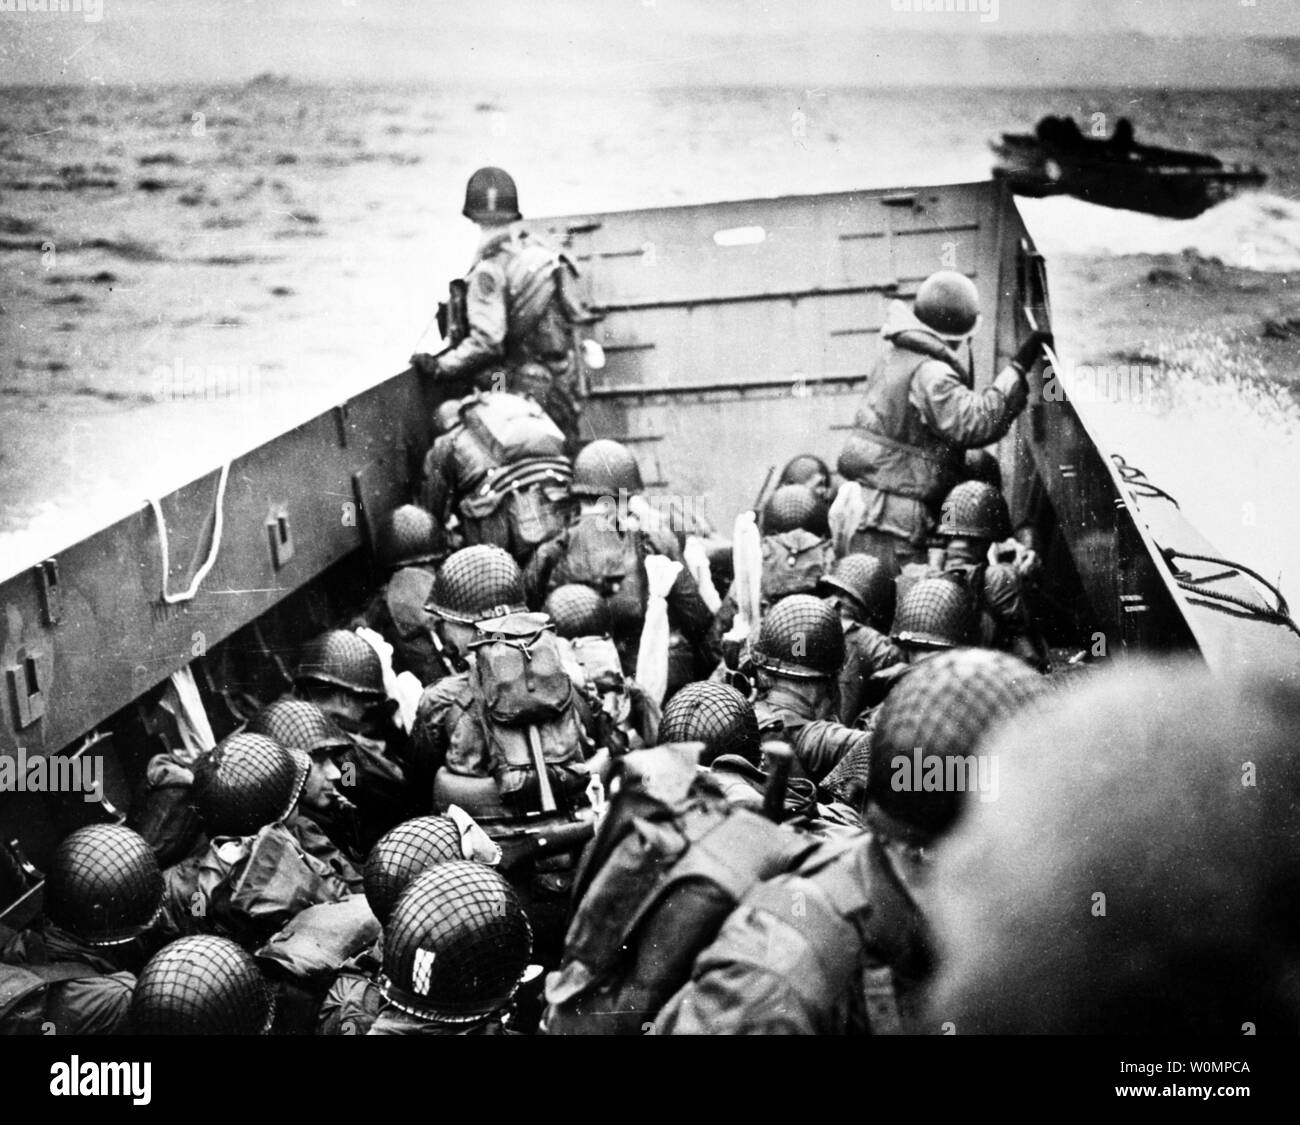 Troops Crouch Inside A Lcvp Landing Craft Just Before Landing On